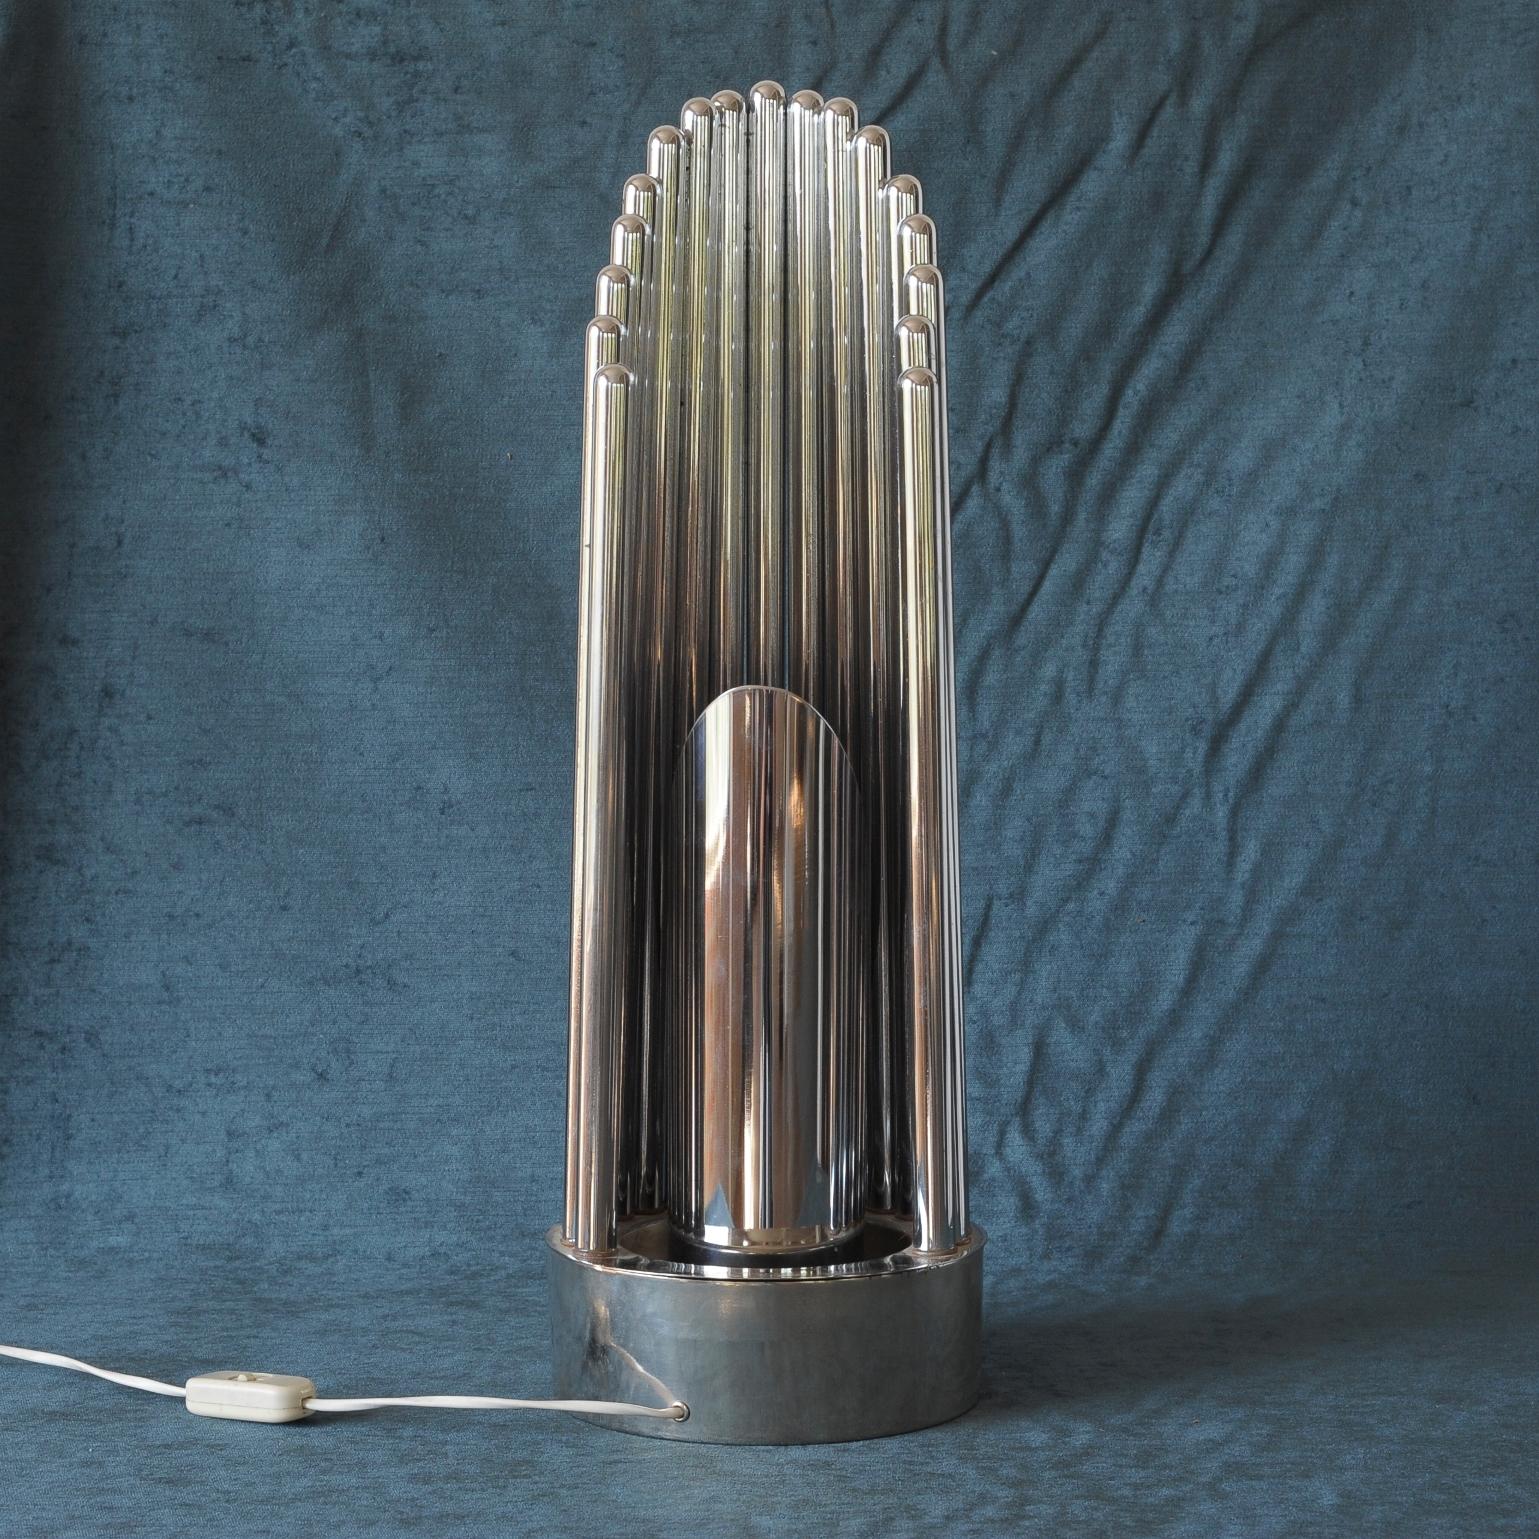 Chrome table lamp of tubular pipes on a strong platform base.
Rotating tube with light source in the middle of surrounding banister of chromed pipes.
With single move the light reflection can be adjusted, modified. It is more fun to control